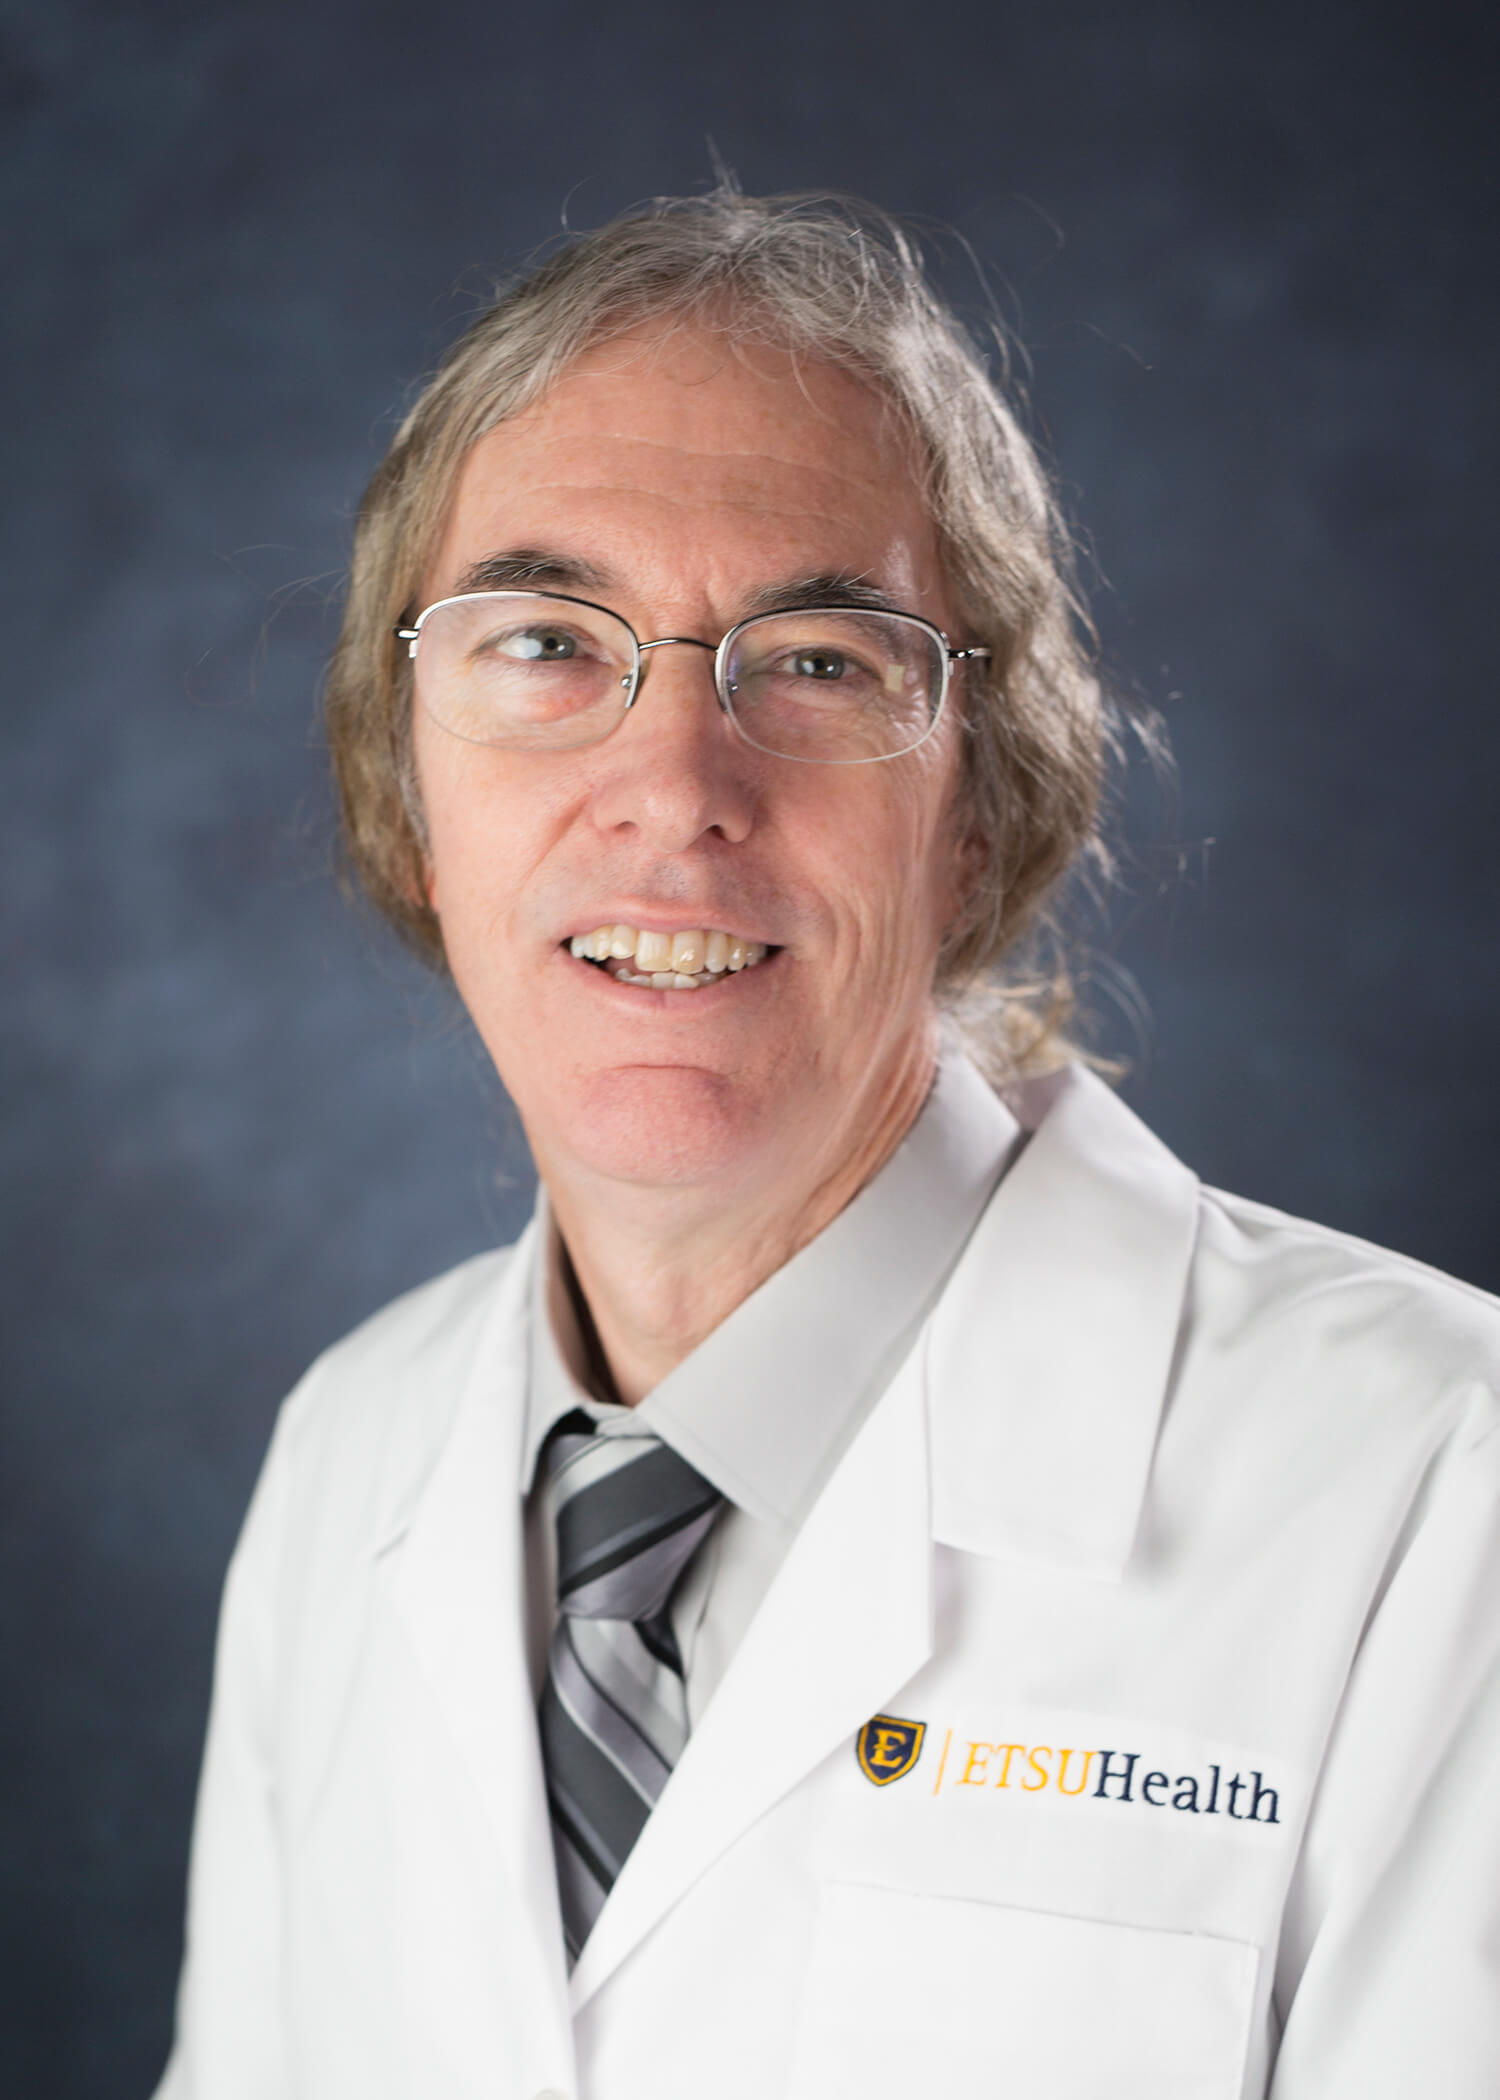 Photo of Greg Clarity, M.D.